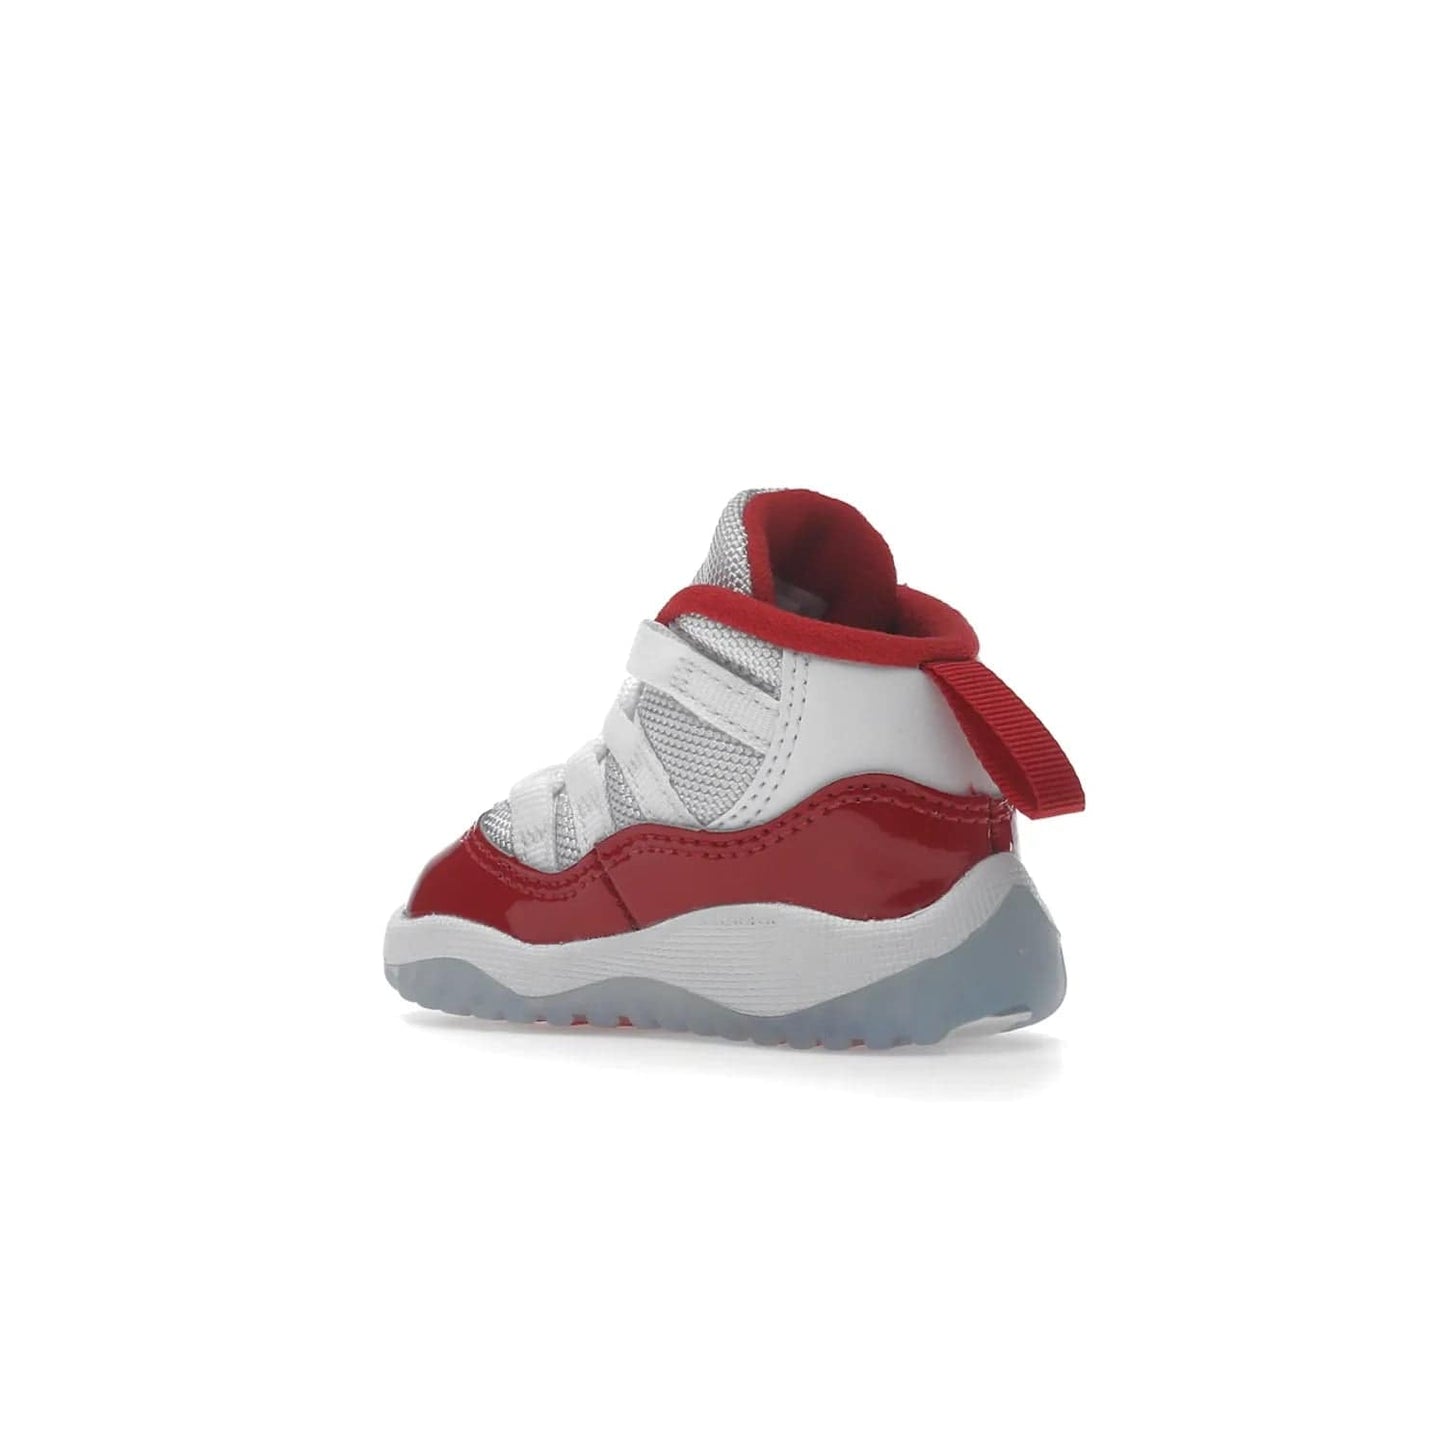 Jordan 11 Retro Cherry (2022) (TD) - Image 23 - Only at www.BallersClubKickz.com - Timeless classic. Air Jordan 11 Retro Cherry 2022 TD combines mesh, leather & suede for a unique look. White upper with varsity red suede. Jumpman logo on collar & tongue. Available Dec 10th, priced at $80.